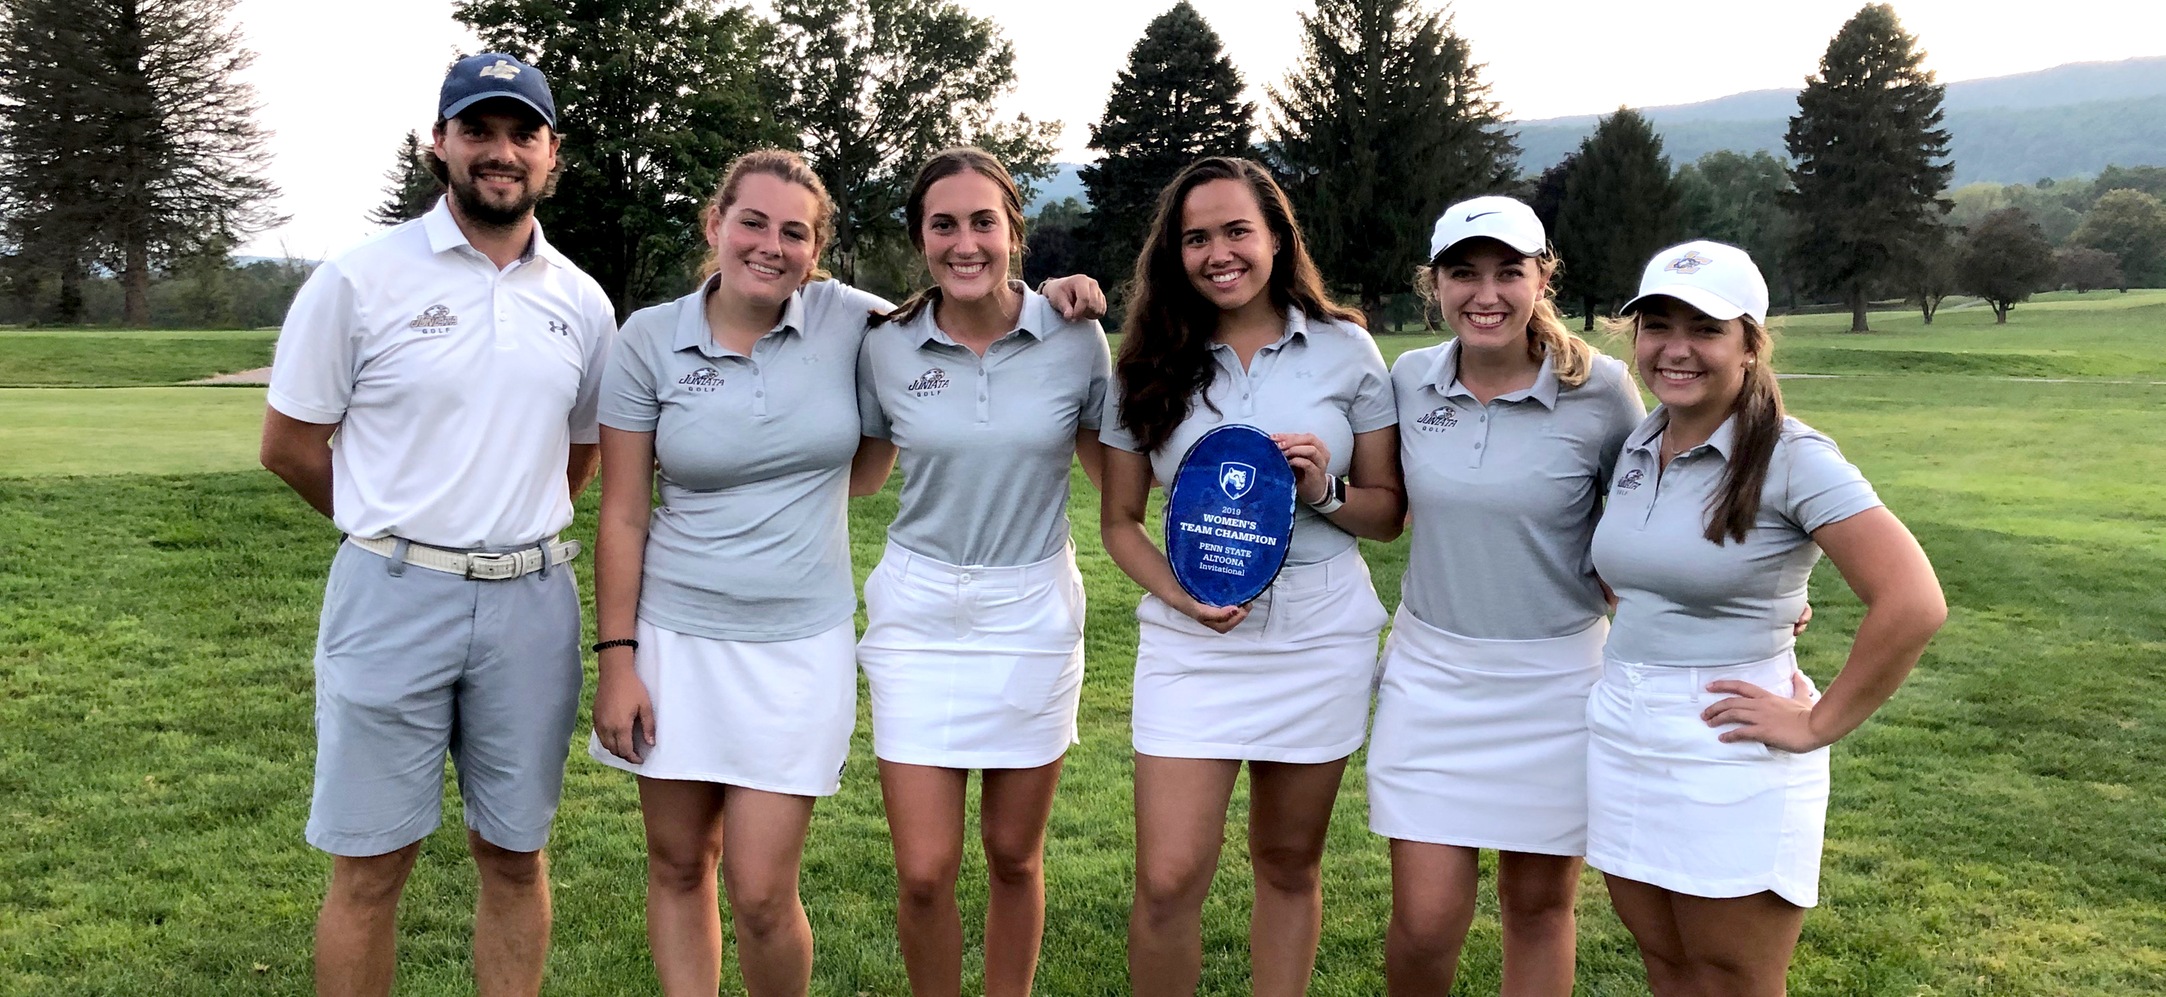 Women's golf earned their first ever team win in Juniata history